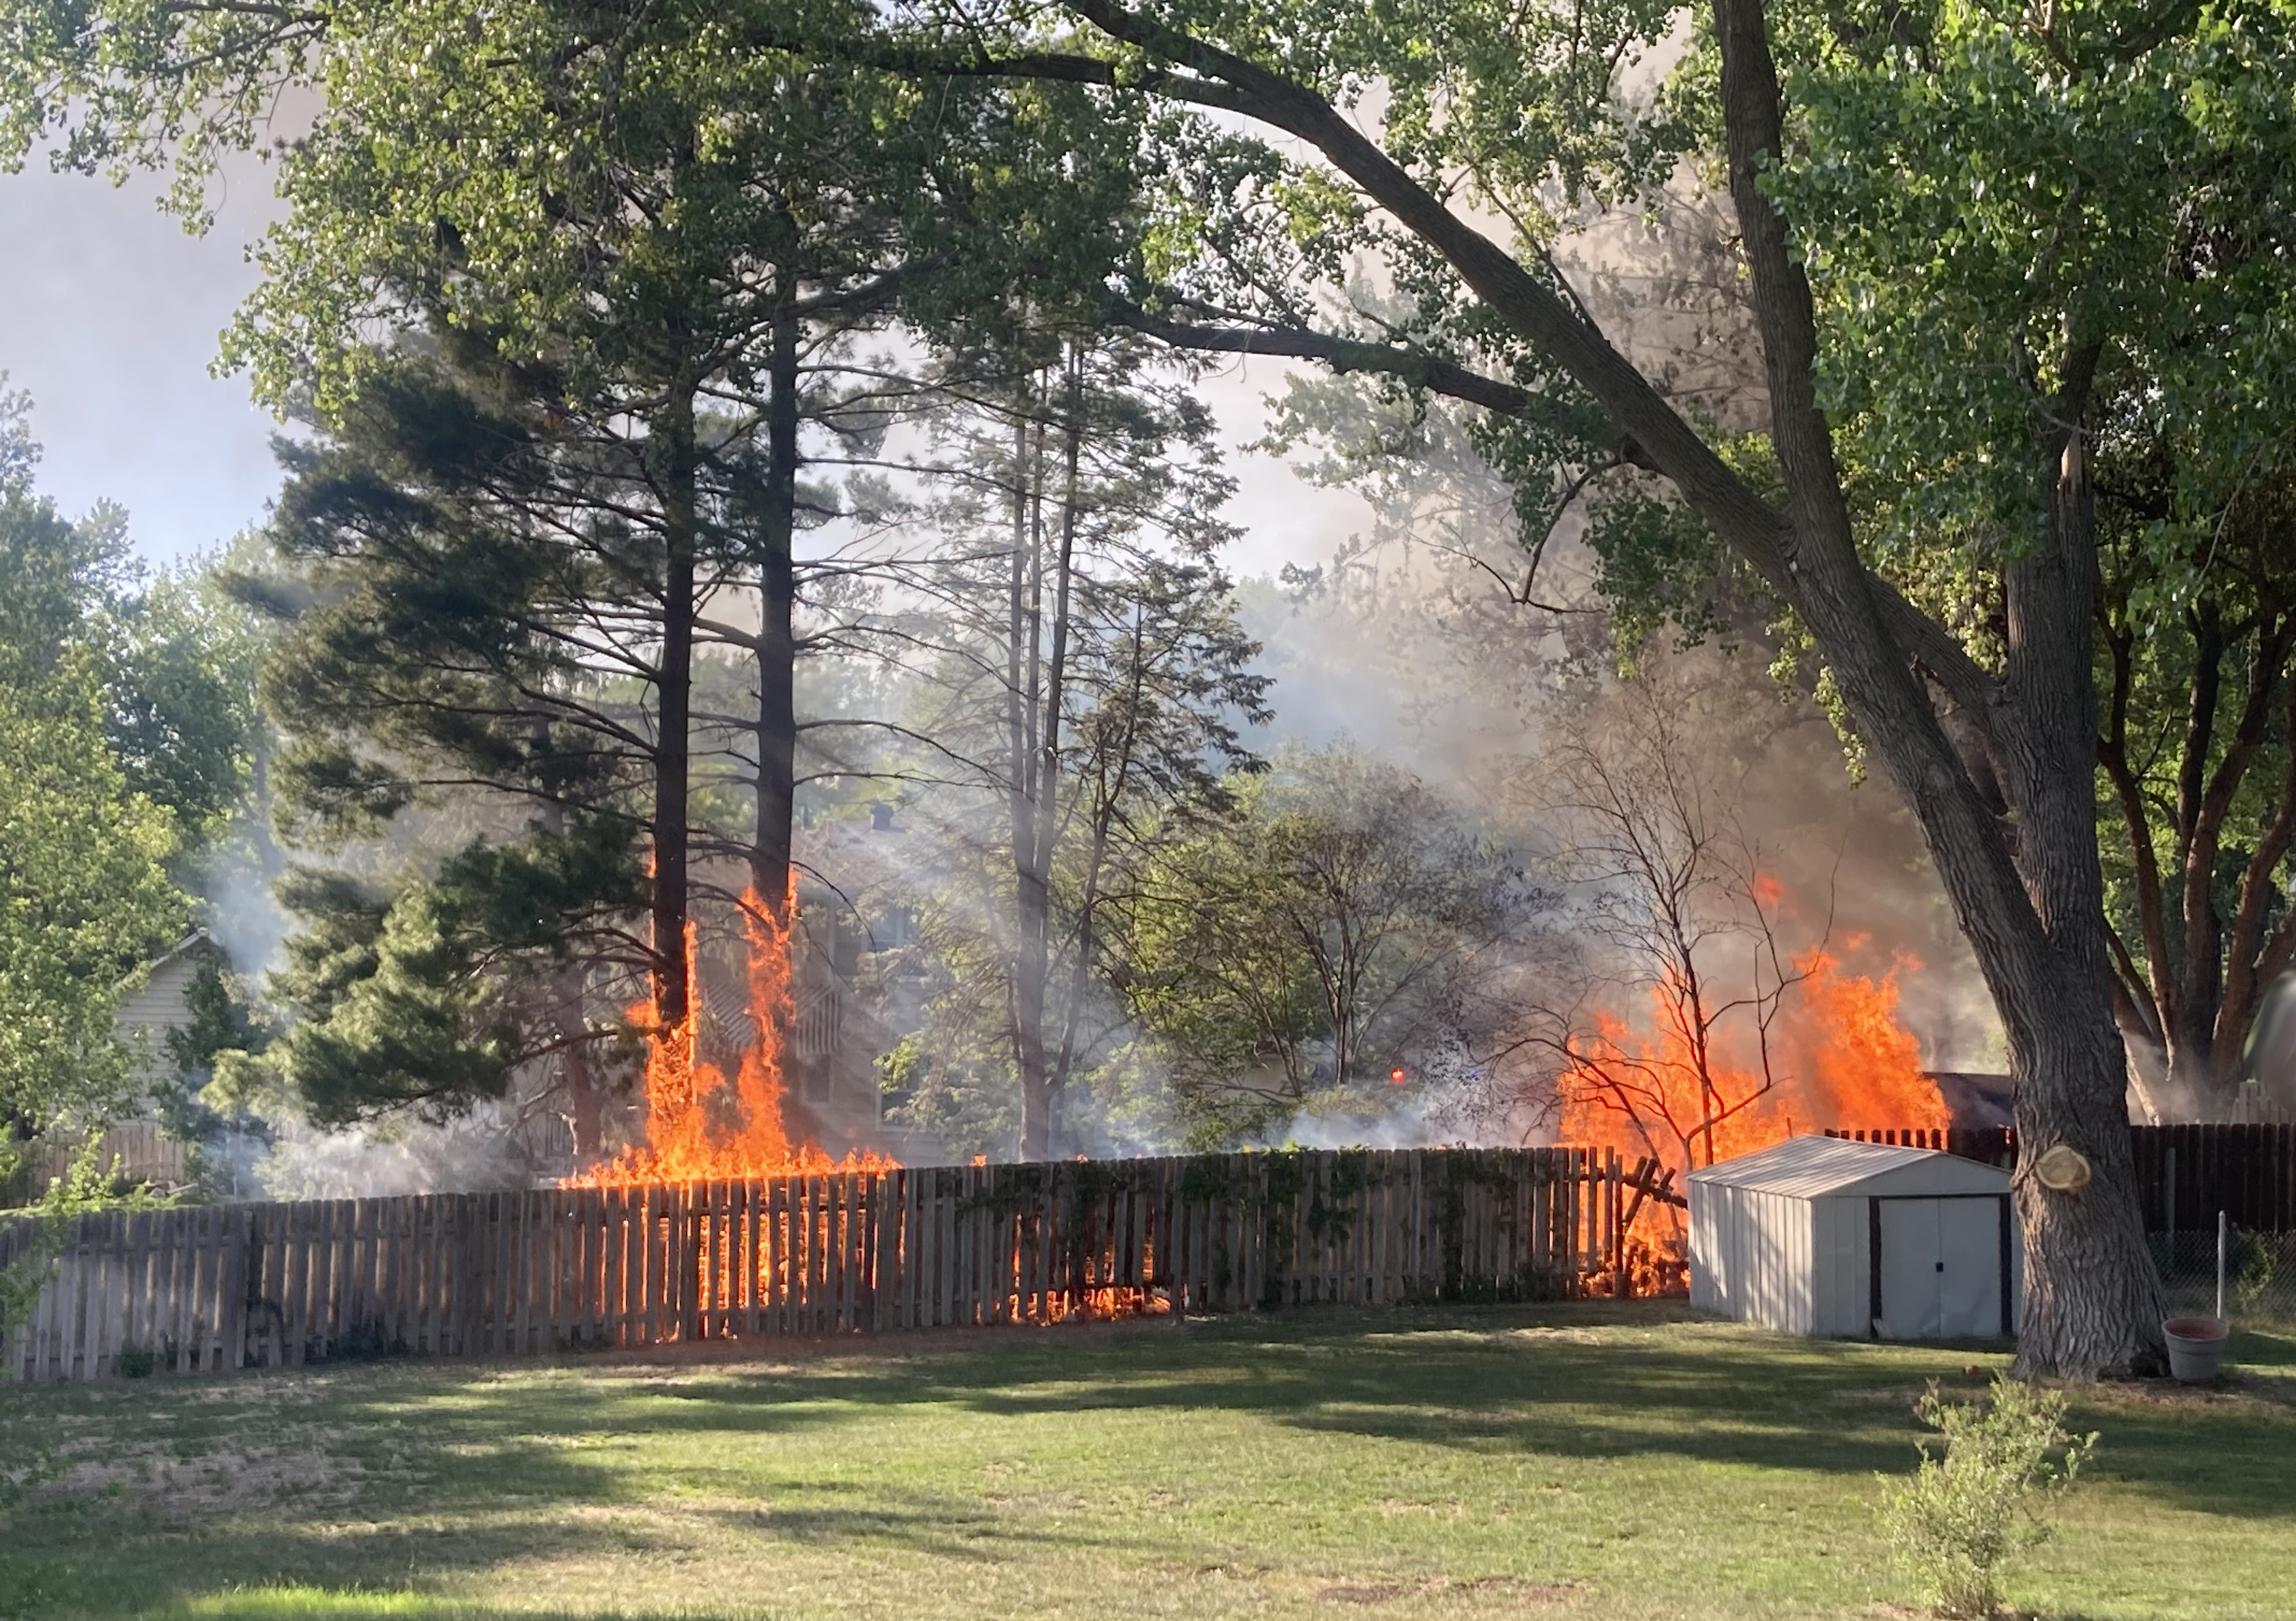 Fire on a fence in a neighborhood. Image courtesy of Sarah Browning